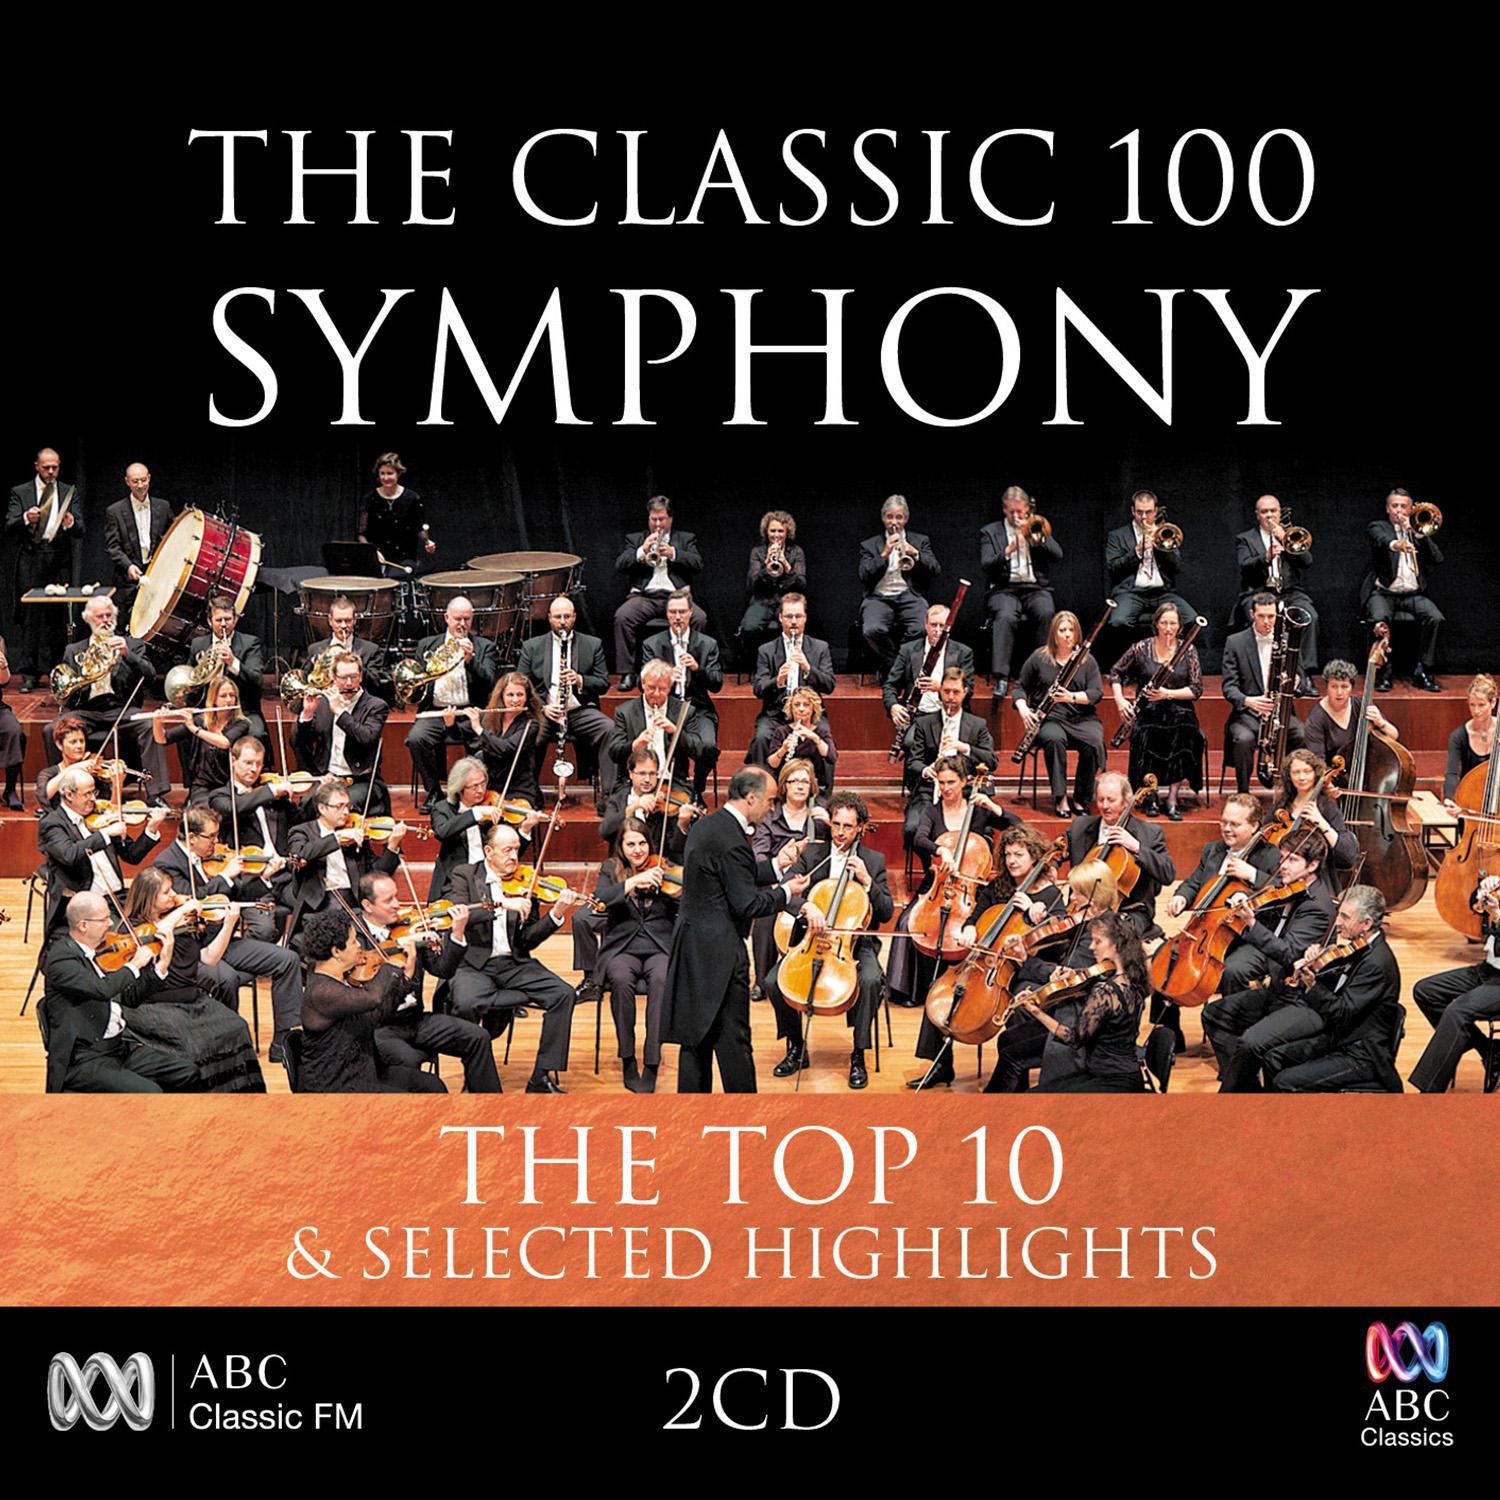 The Classic 100: Symphony – The Top 10 & Selected Highlights